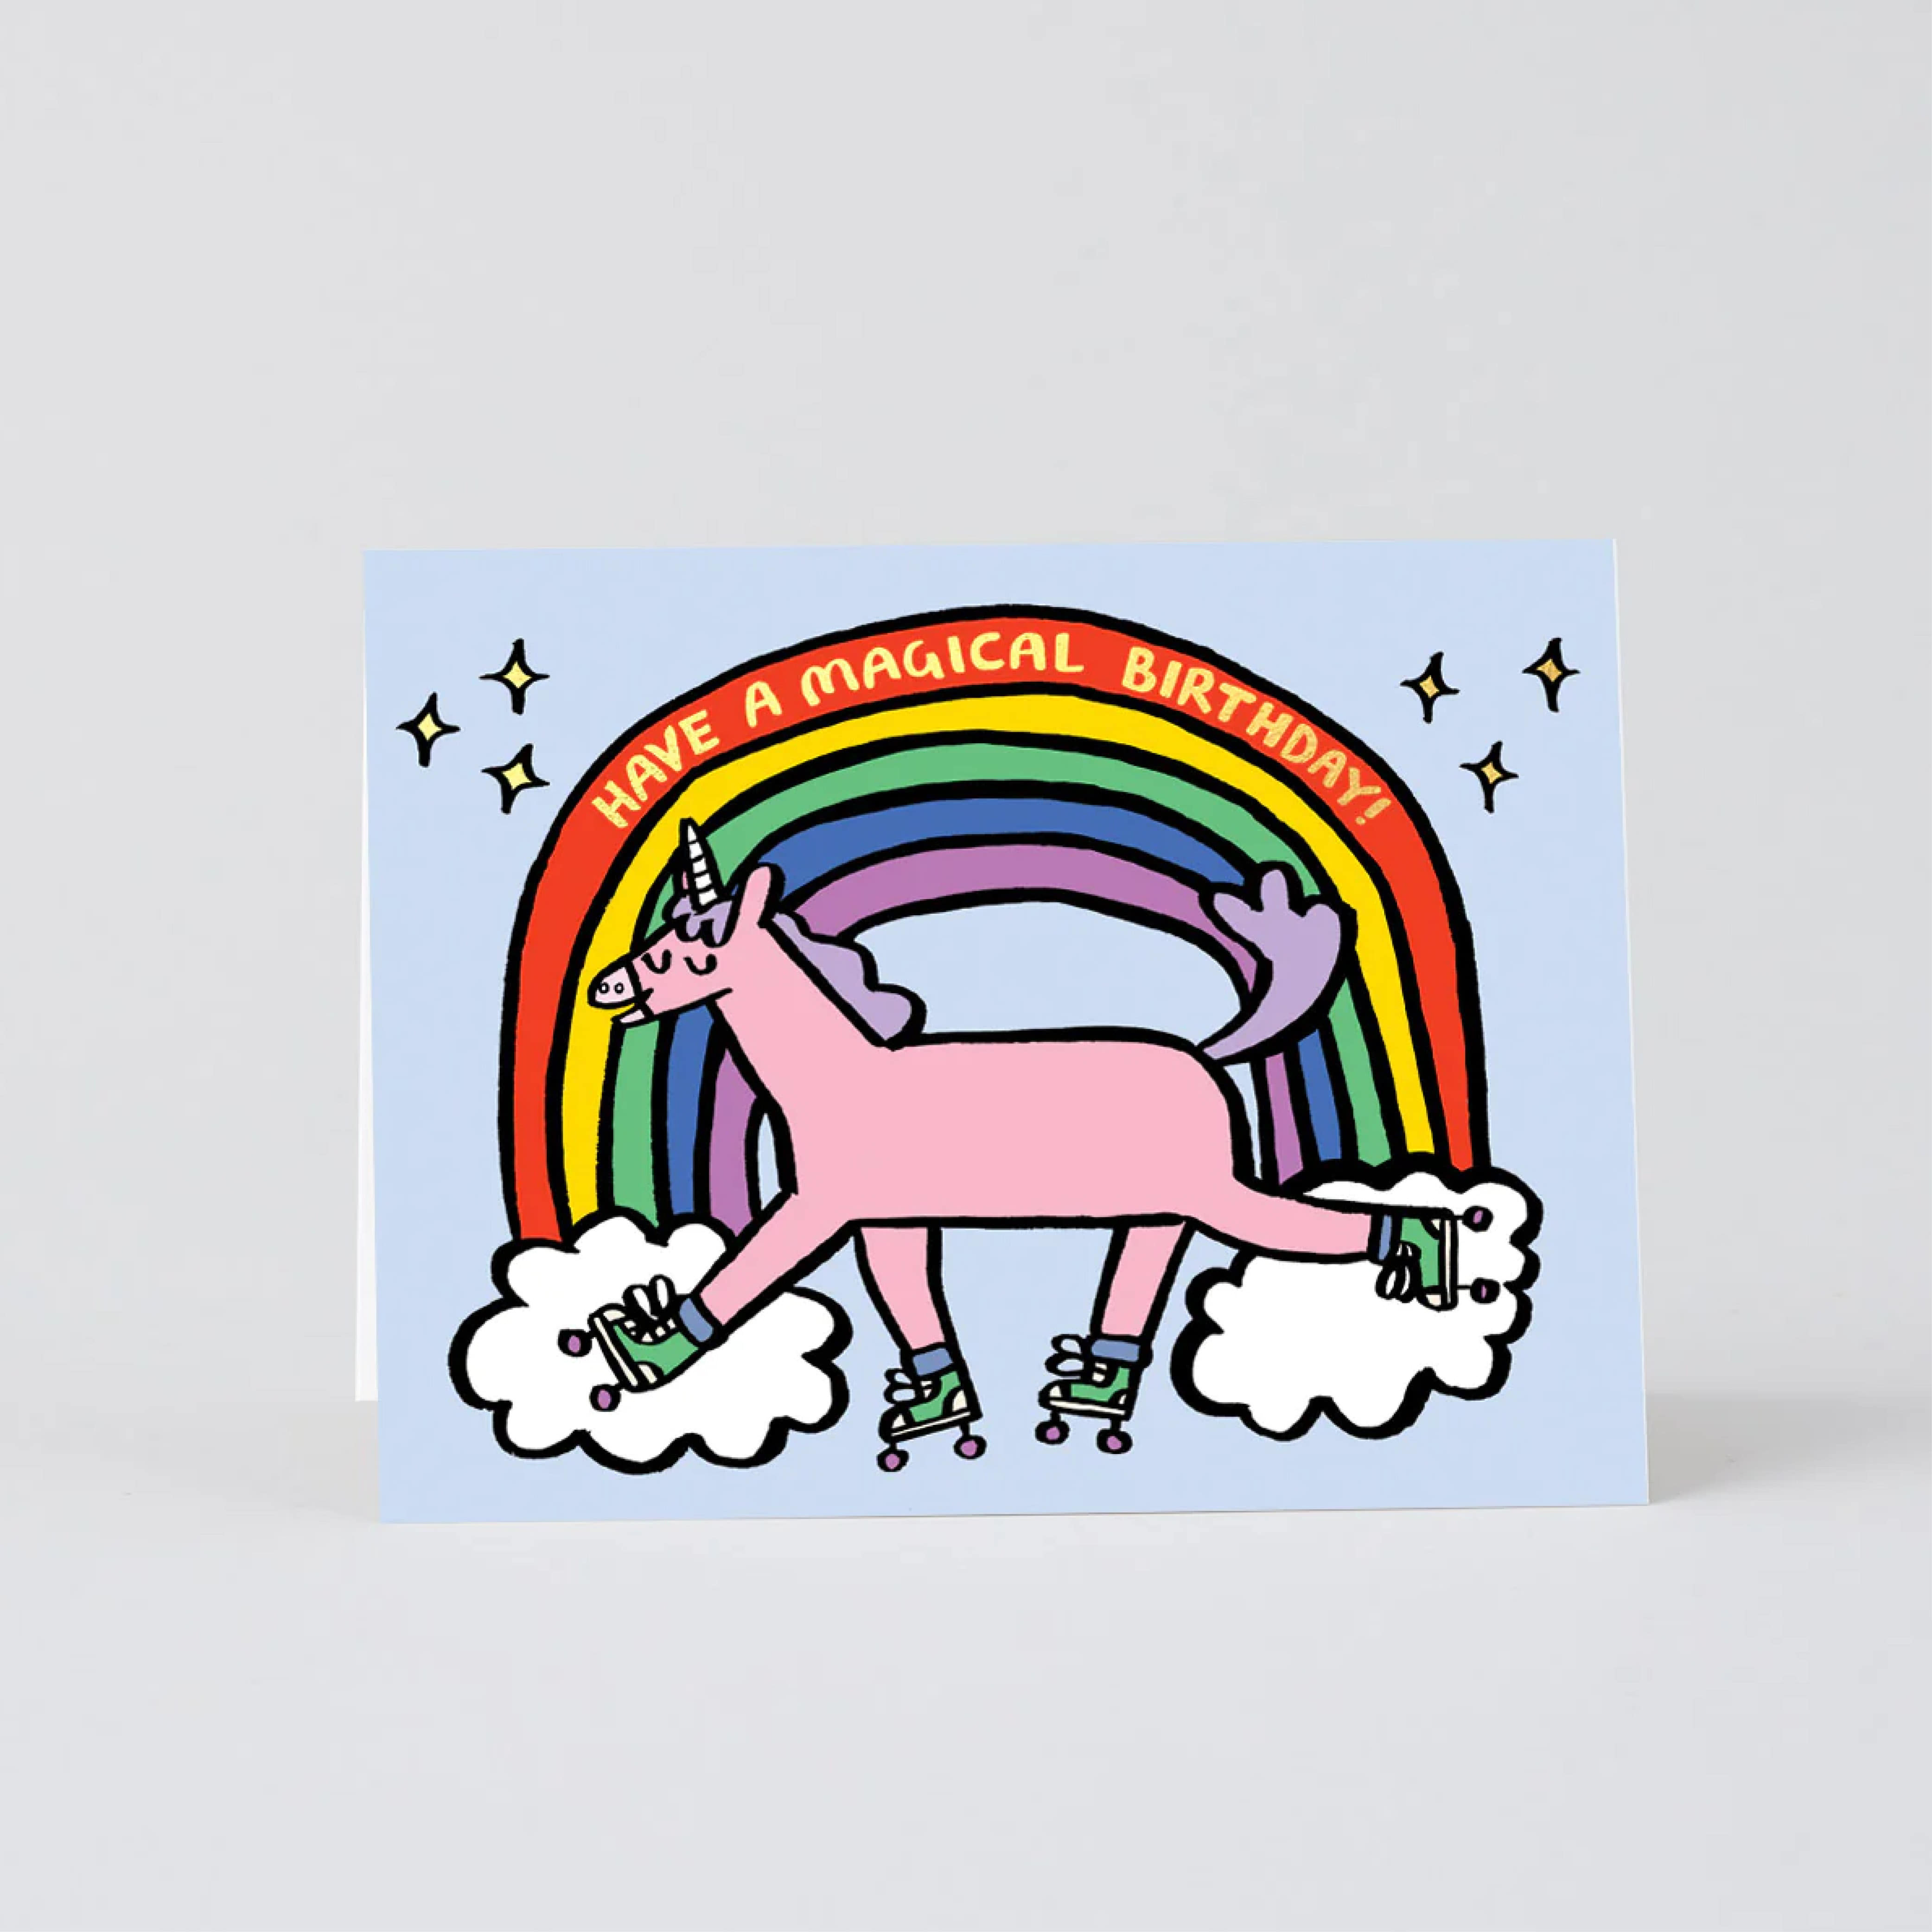 [WRAP] Have a Magical Birthday Kids Greetings Card